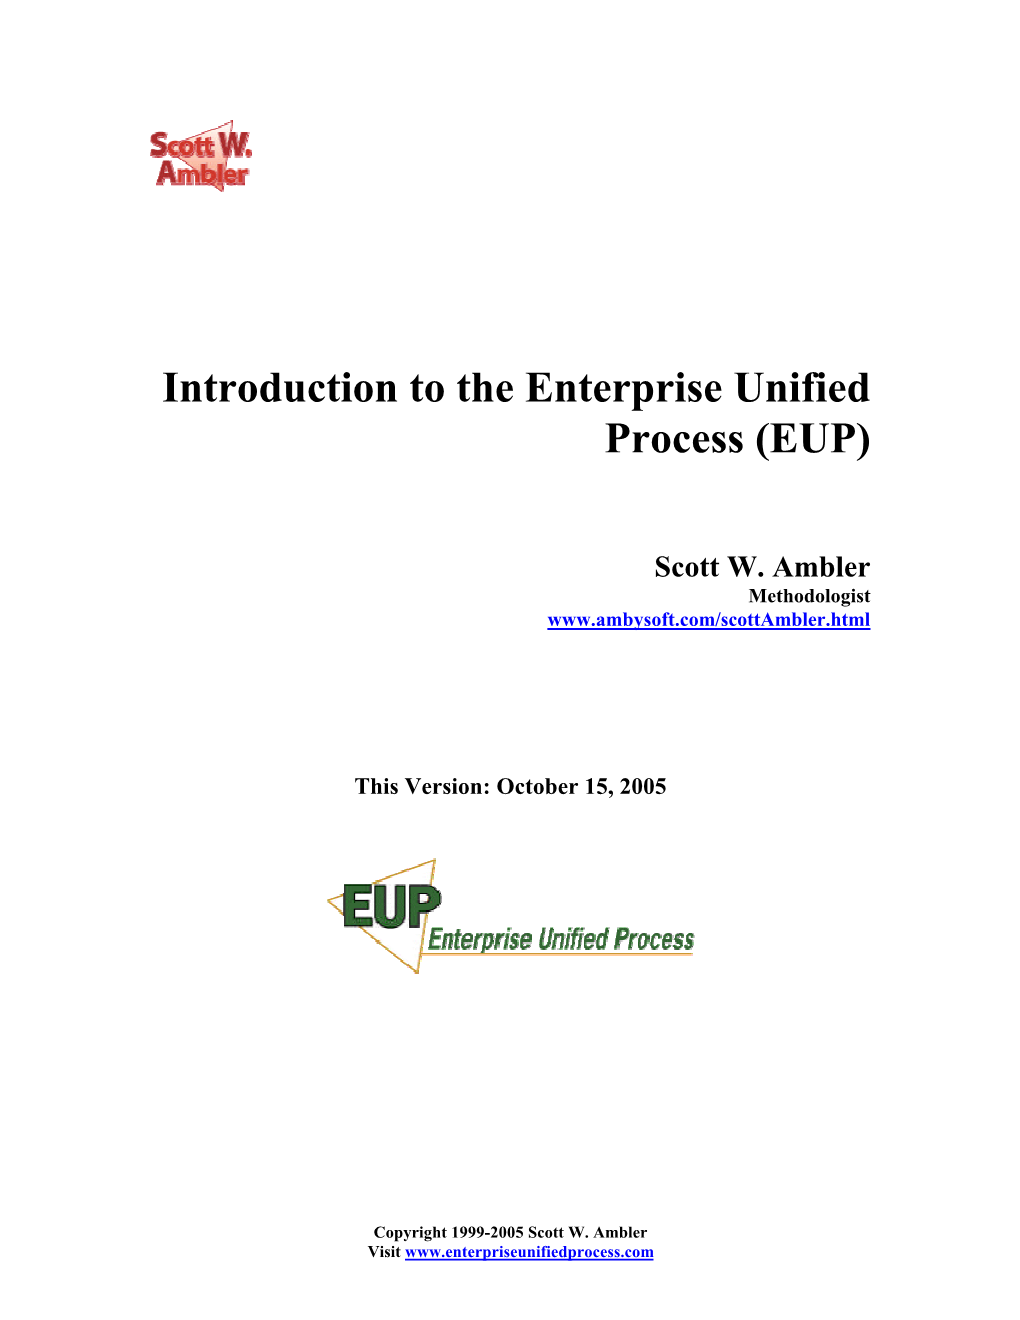 Introduction to the Enterprise Unified Process (EUP)